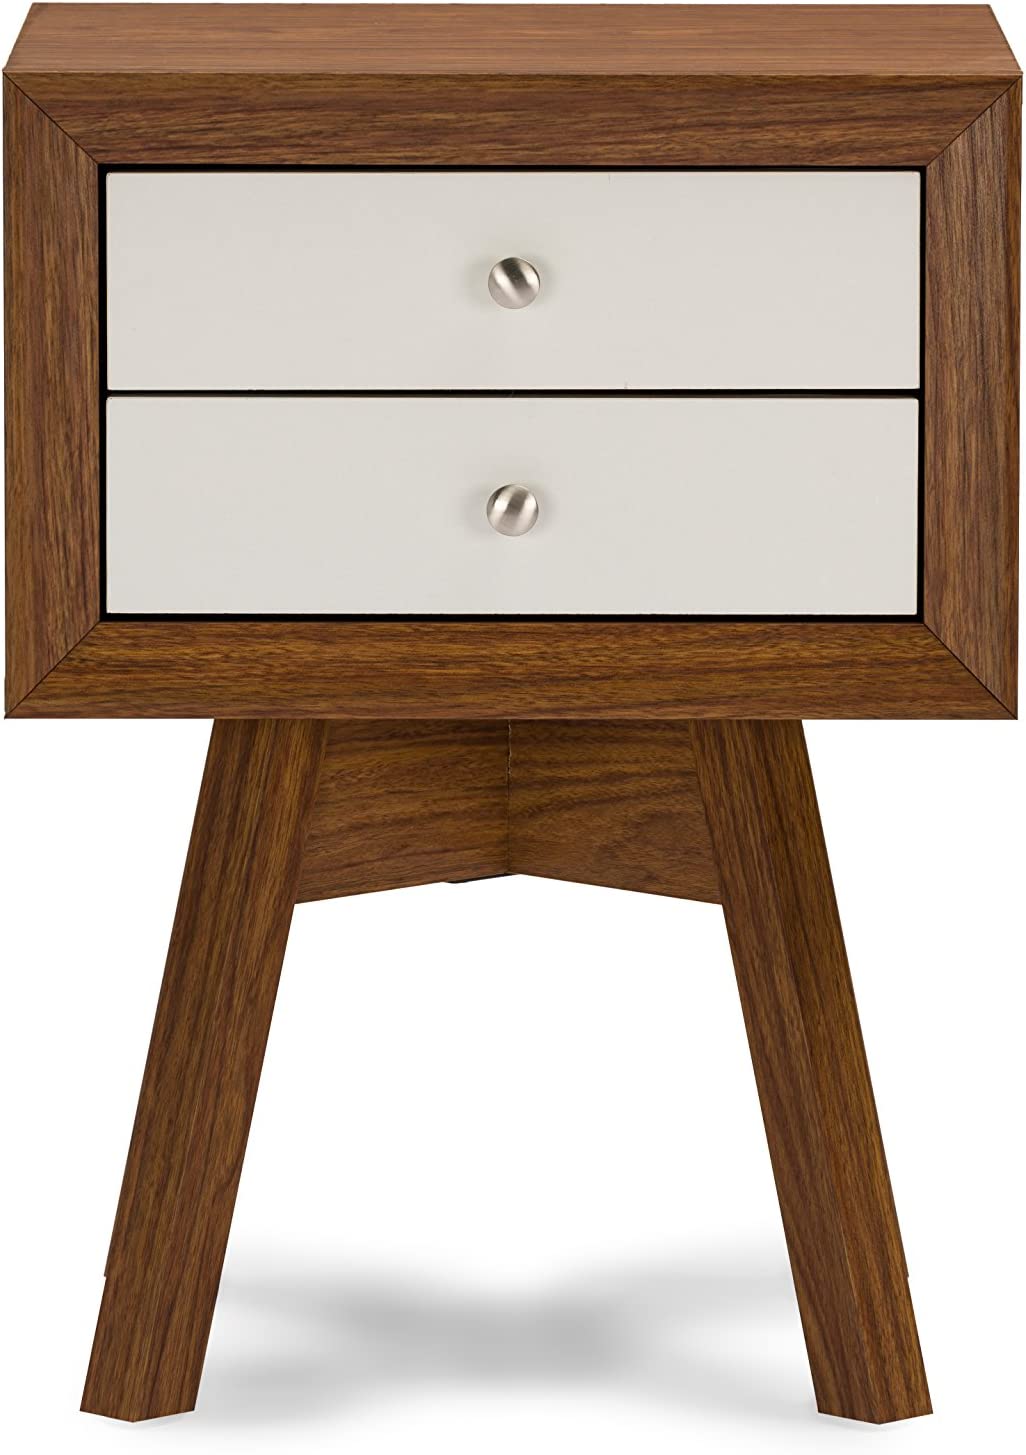 Baxton Studio Warwick Two-Tone Modern Accent Table and Nightstand, Walnut/White